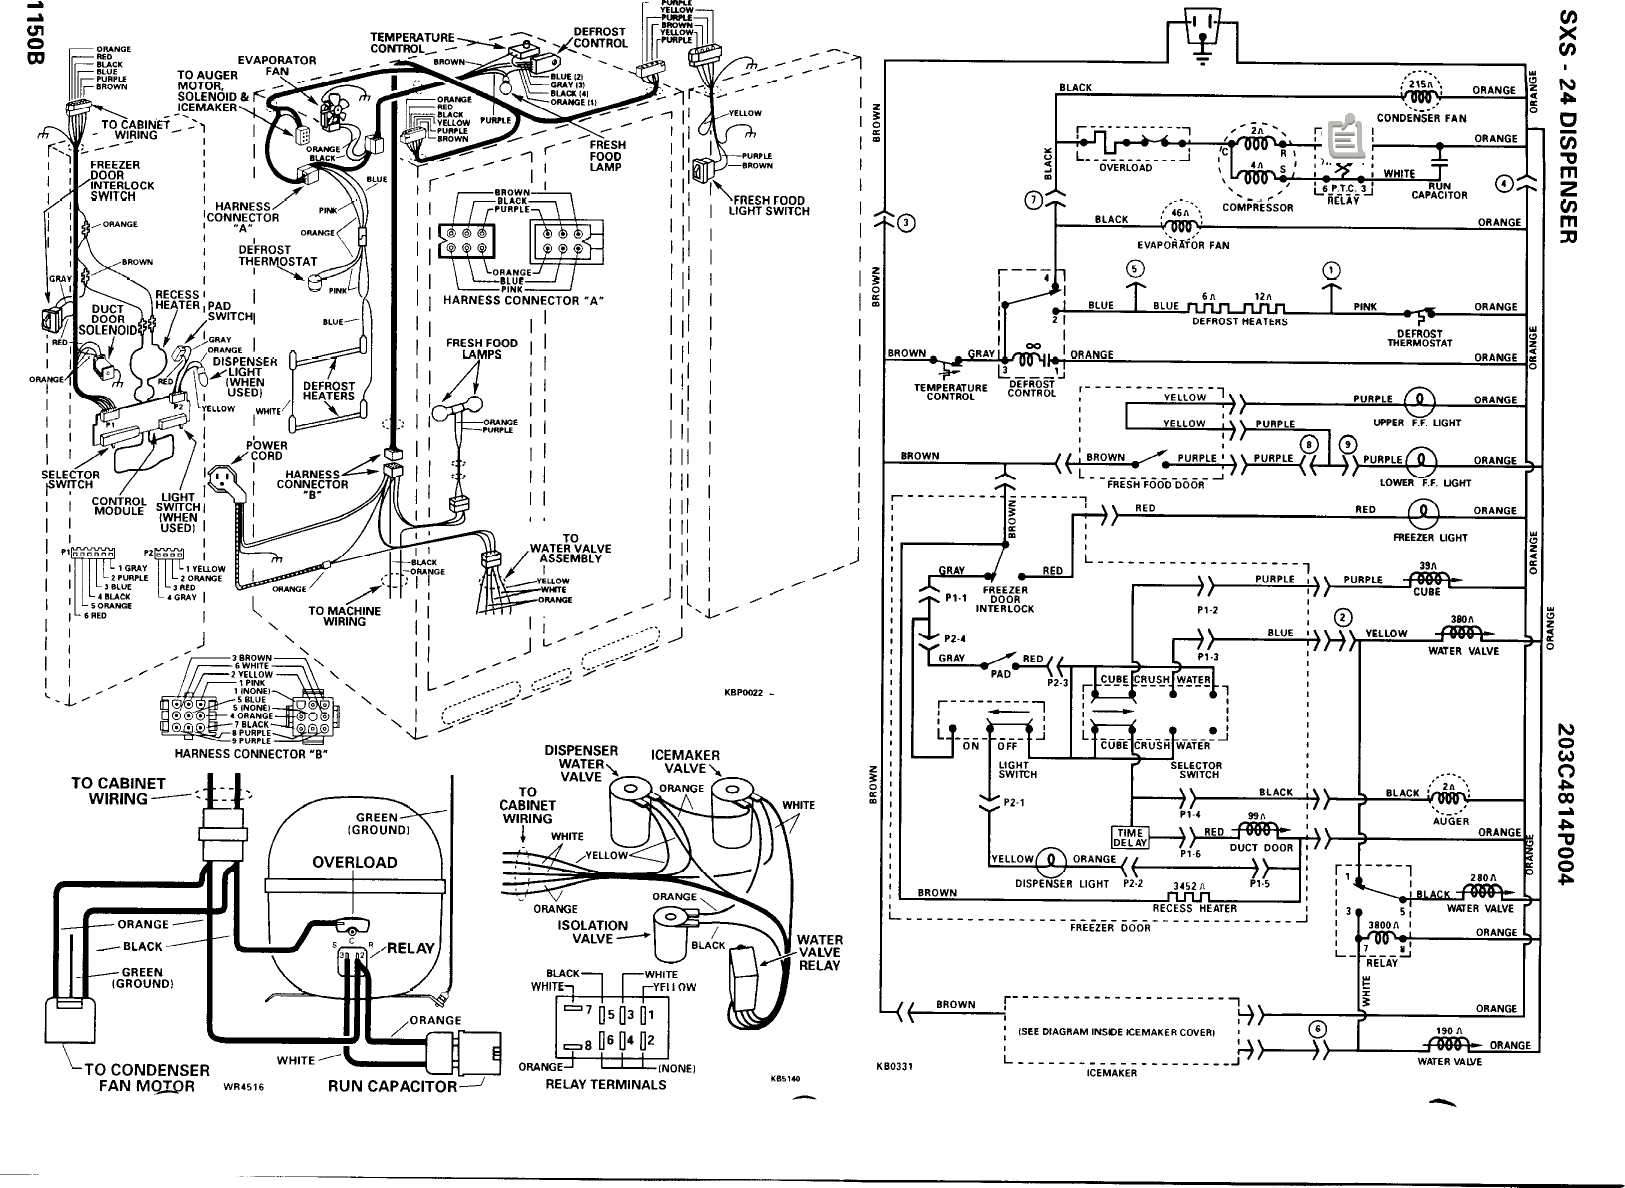 Page 1 of 3 - GE Refrig - Tech Sheet 31-51150